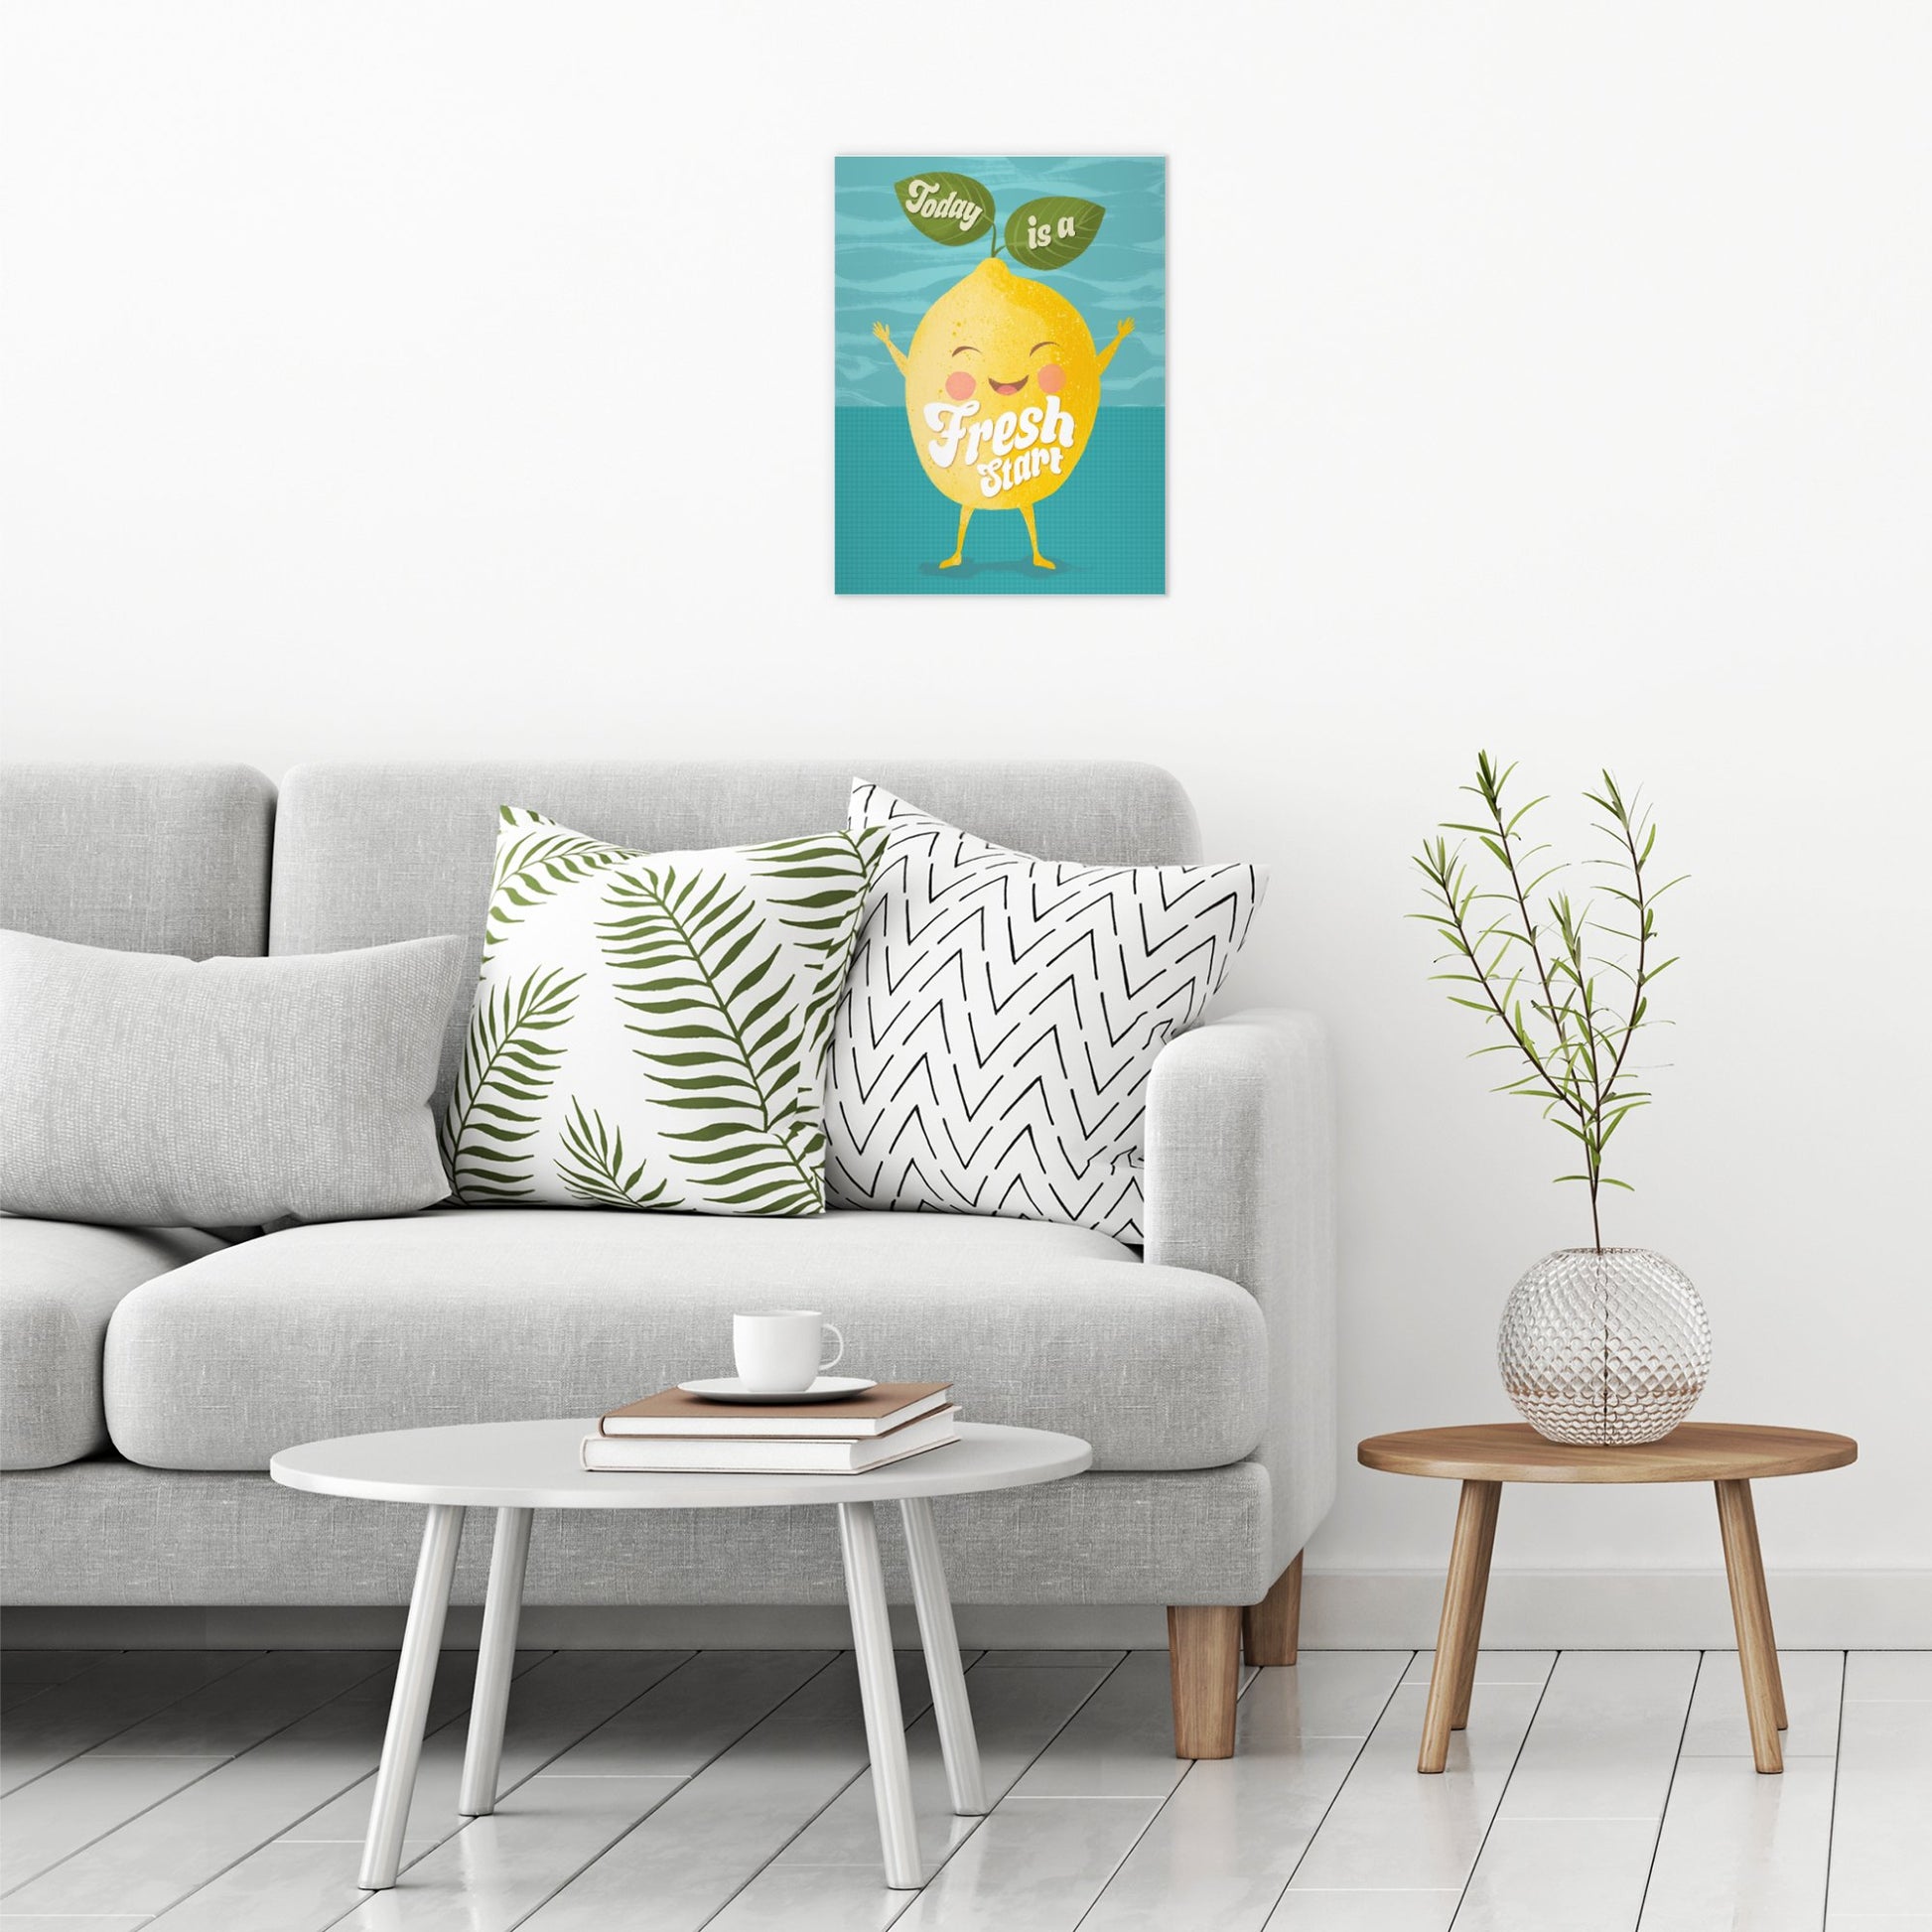 A contemporary modern room view showing a medium size metal art poster display plate with printed design of a Cute Lemon Quote 'Today is a Fresh Start'